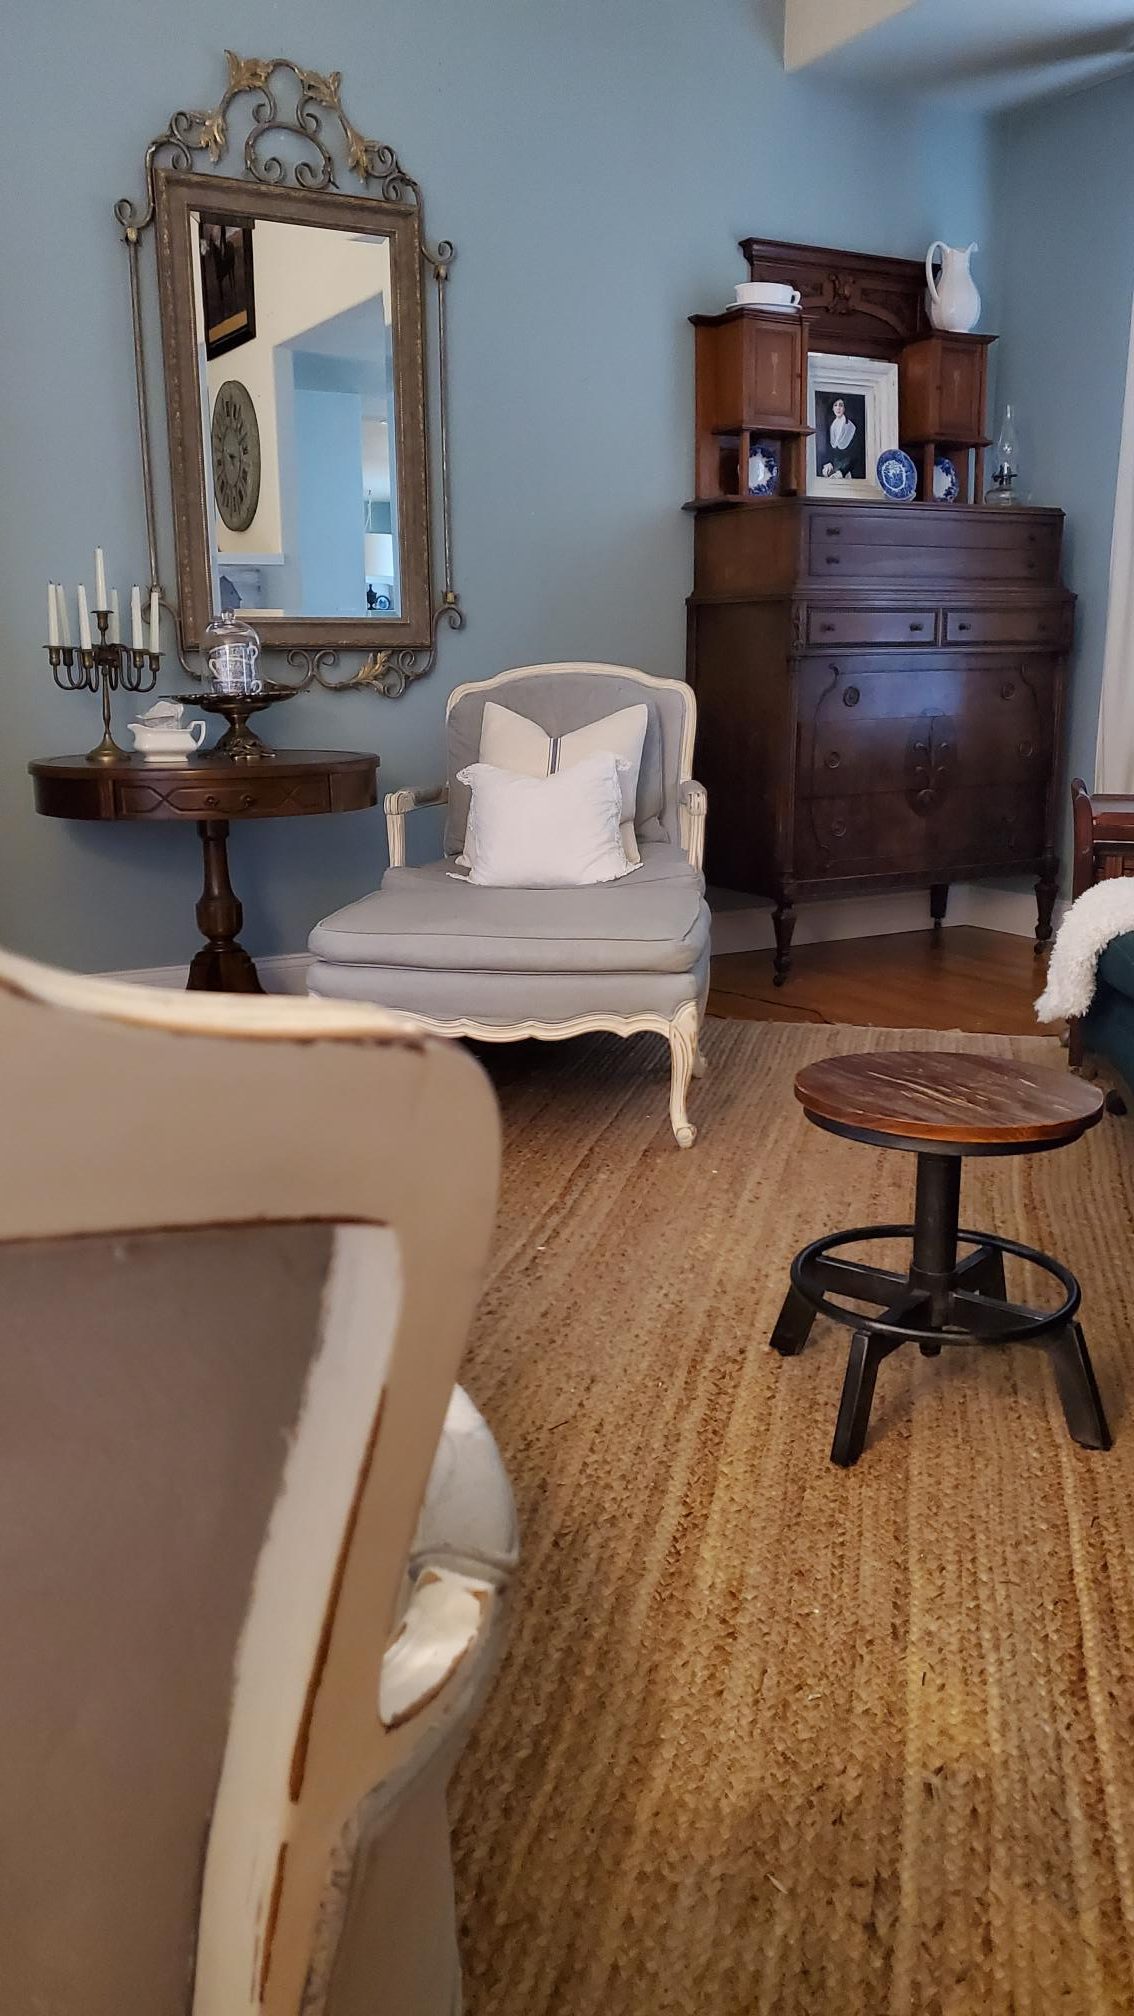 Living room with a chair and ottoman. Antique dresser and large gold and grey mirror.